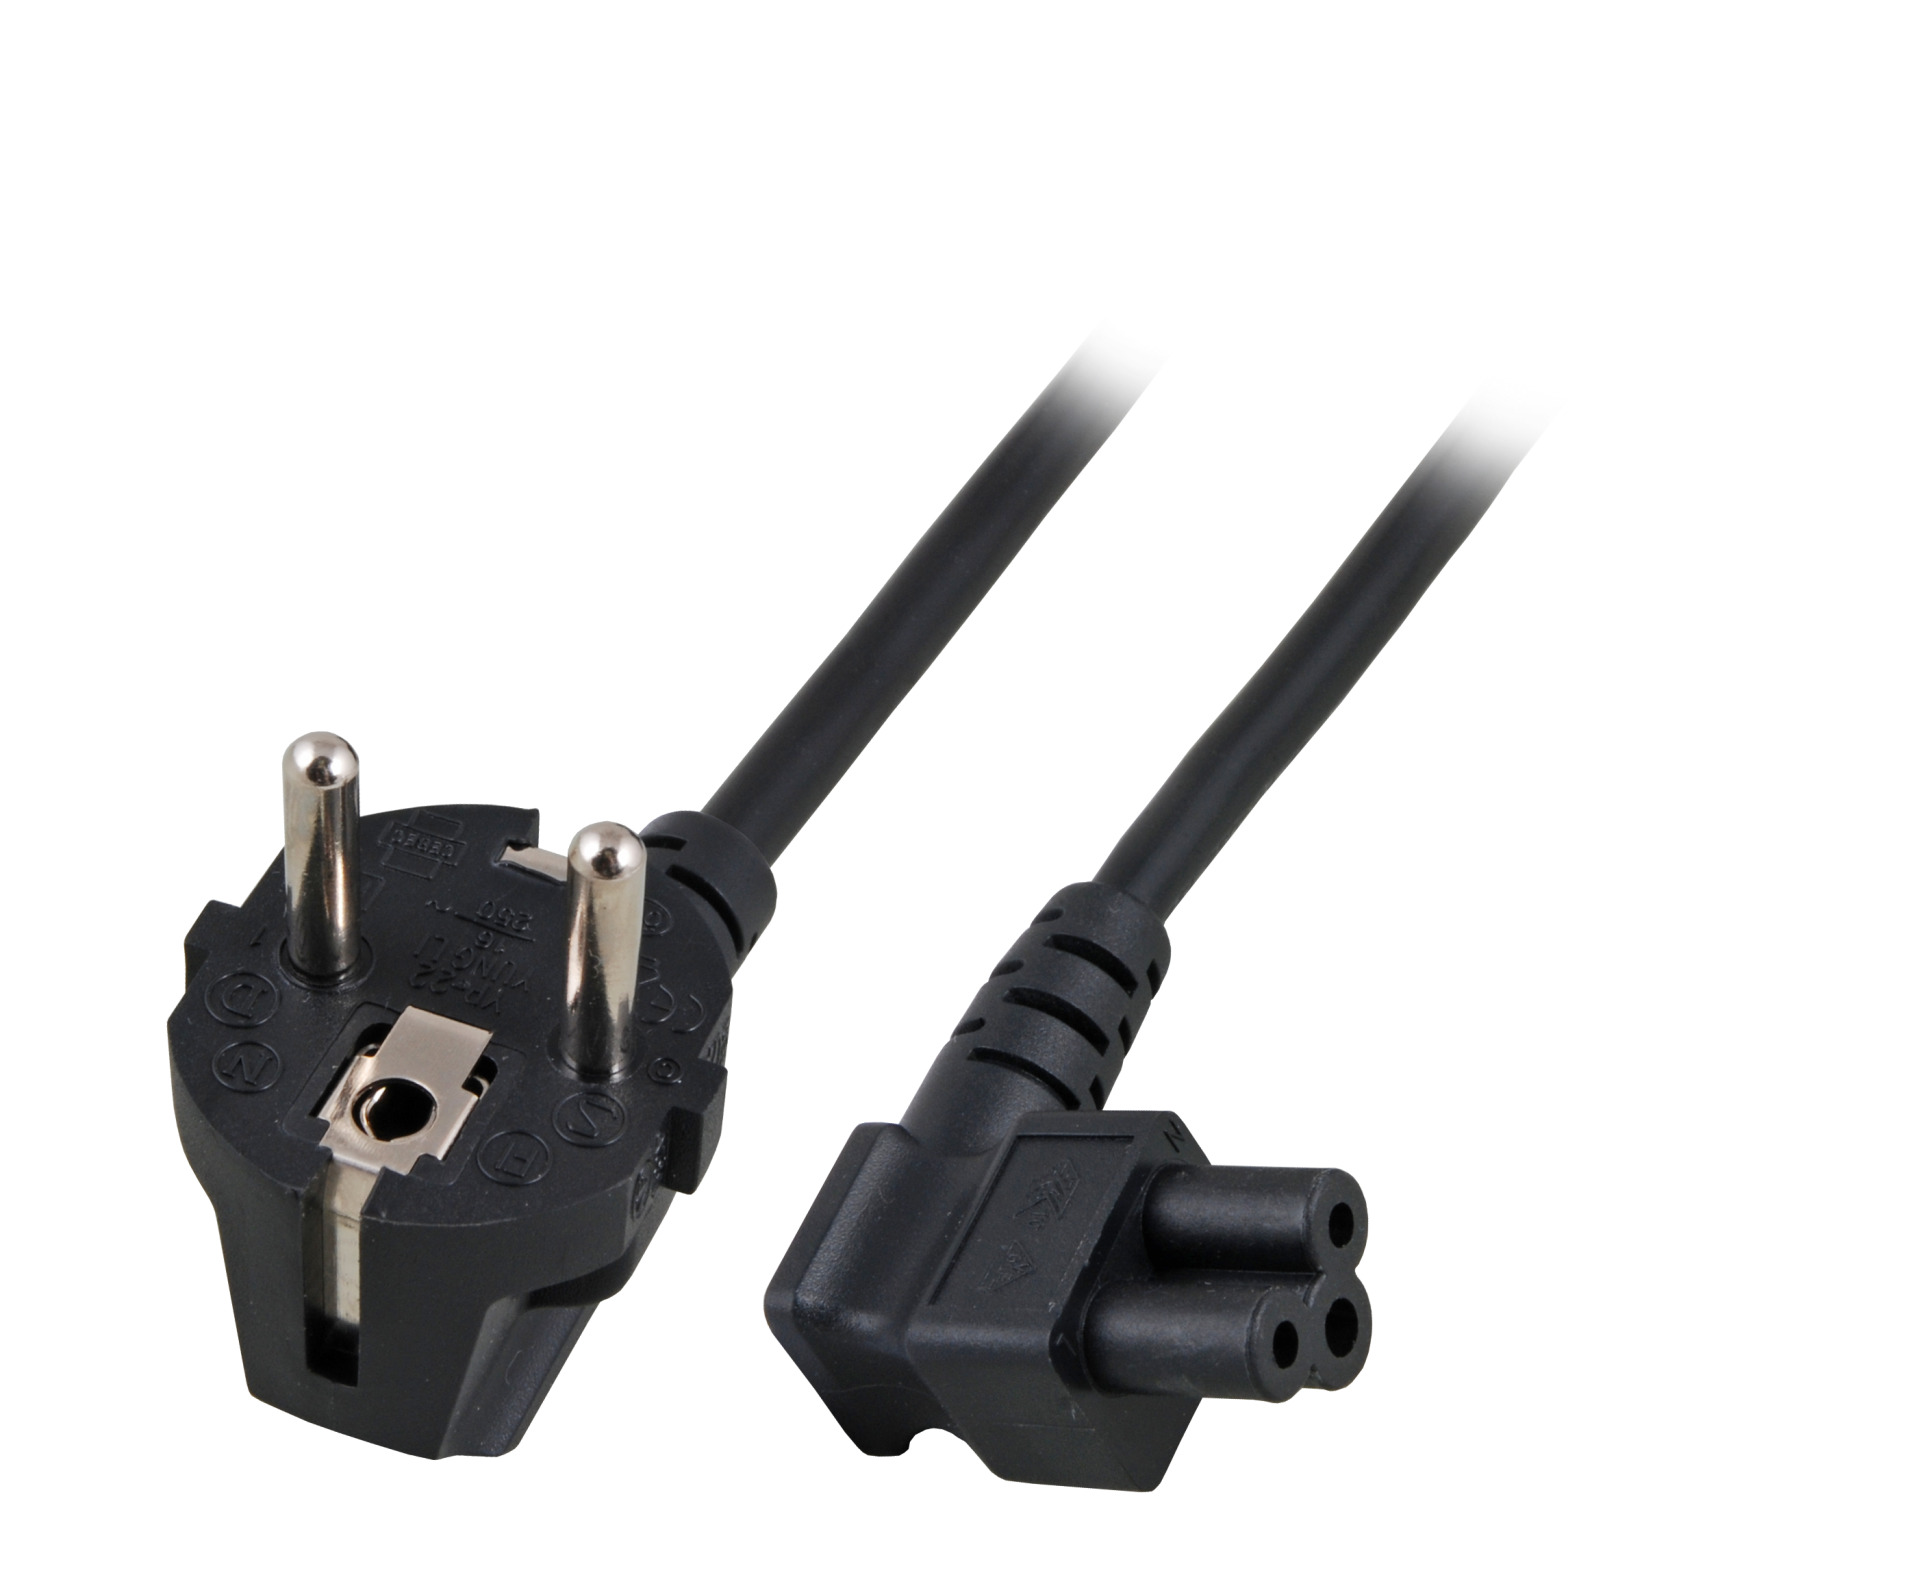 Power Cable CEE7/7 90° - C5 90°, Black, 3.0 m, 3 x 0.75 mm²